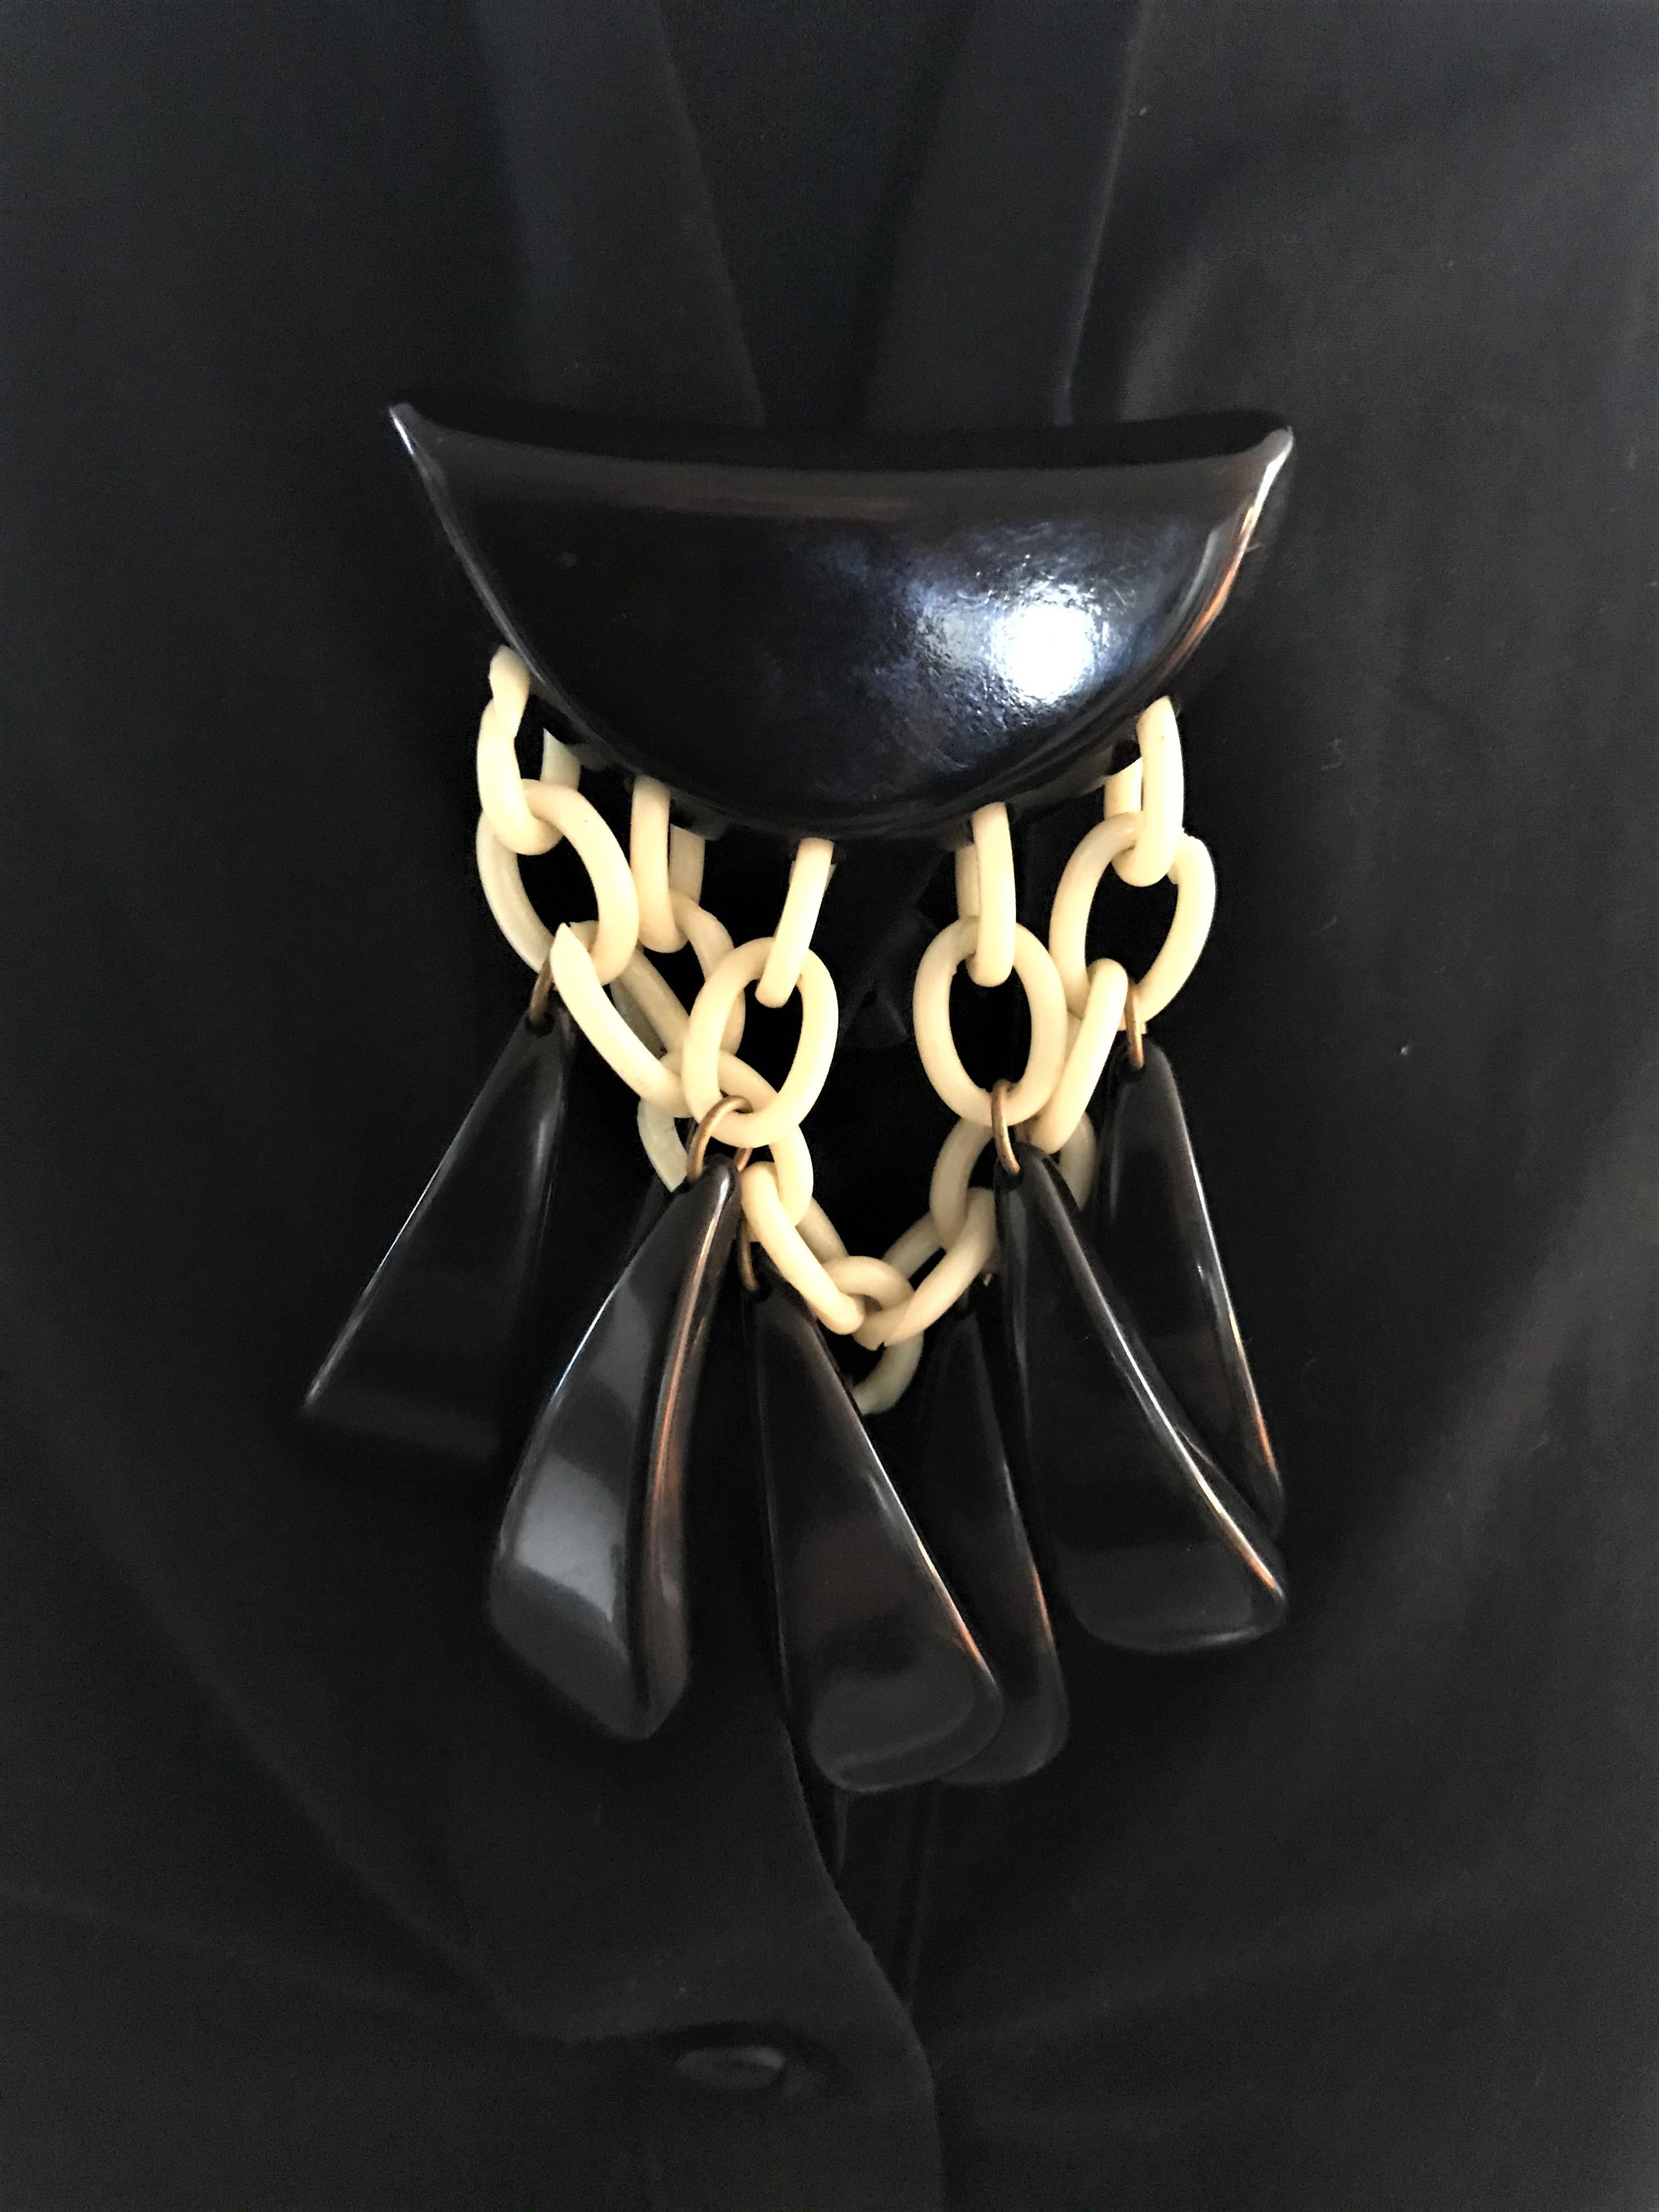 A black Bakelite brooch with 8 drops hanging from pale Bakelite links. Hanging from 3 drops in front and 5 drops behind. The brooch is very light and easy to wear on everything. It is an early piece from the USA where Bakelite is very popular.